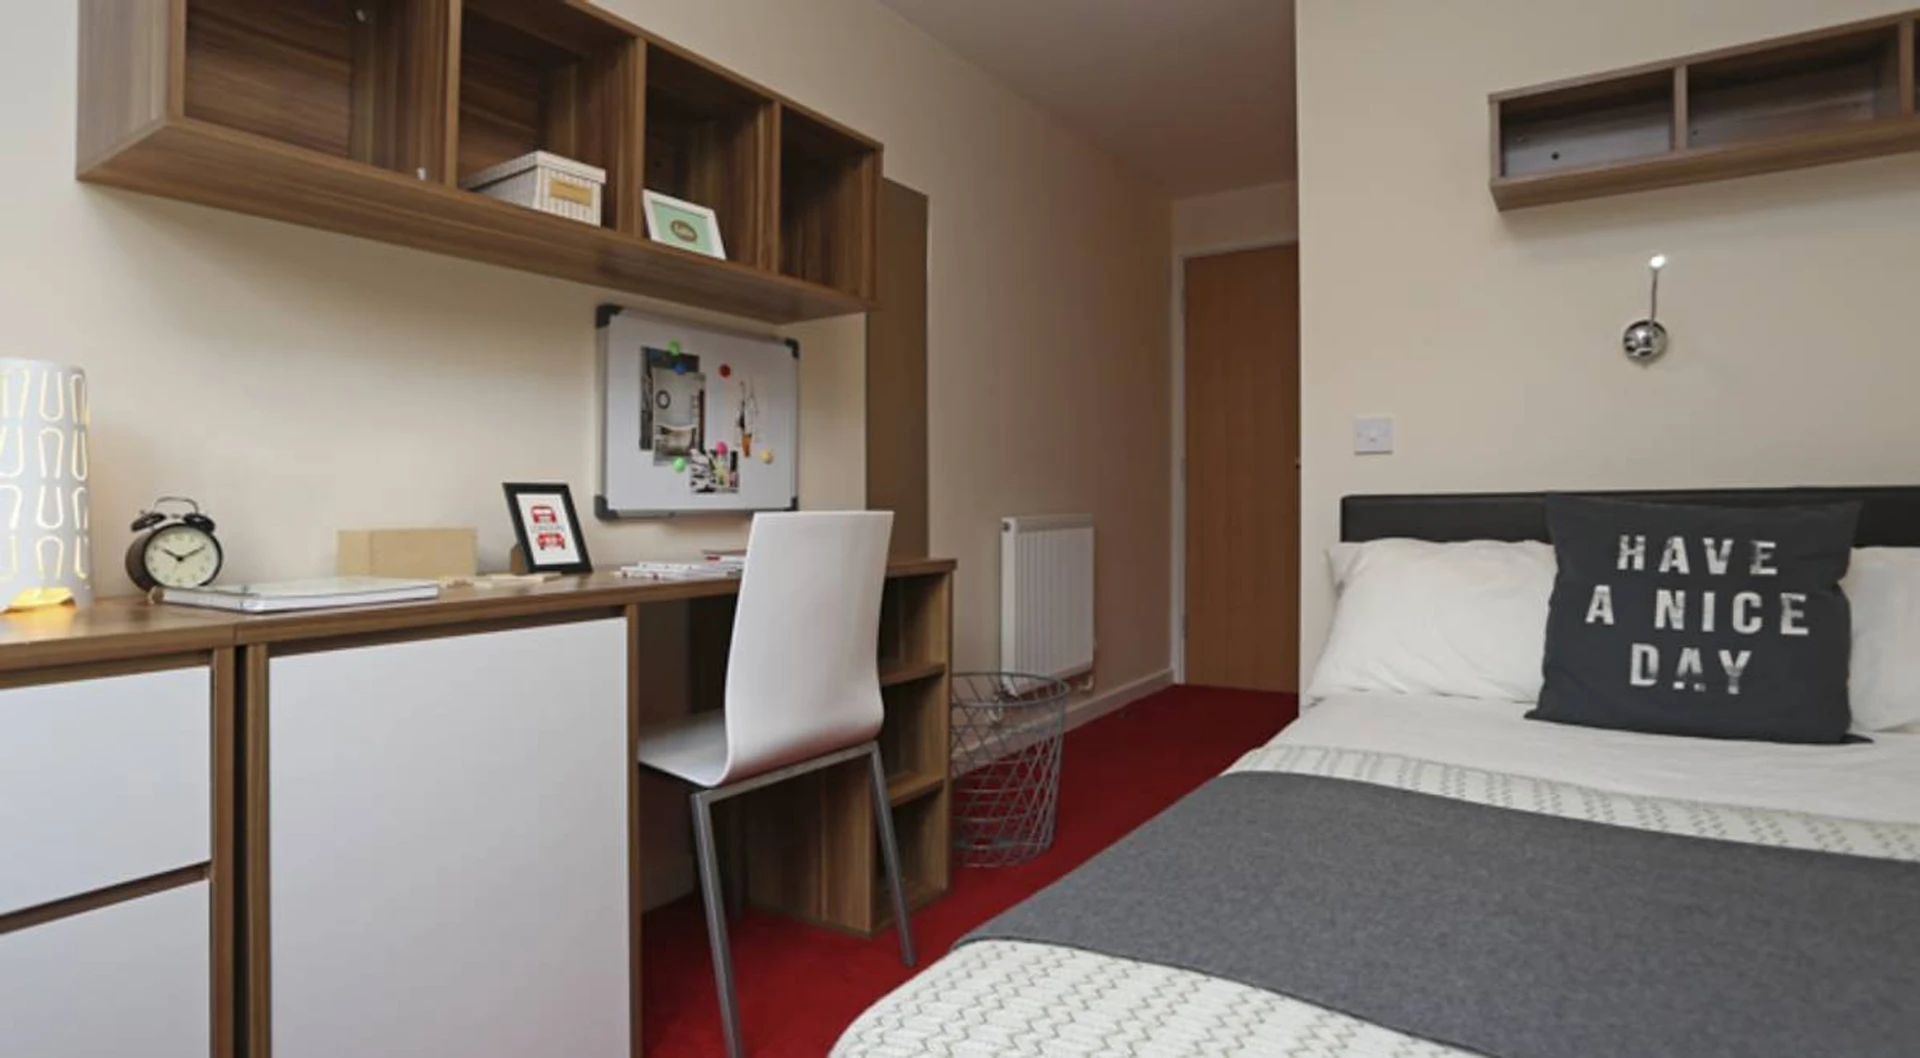 Renting rooms by the month in Canterbury